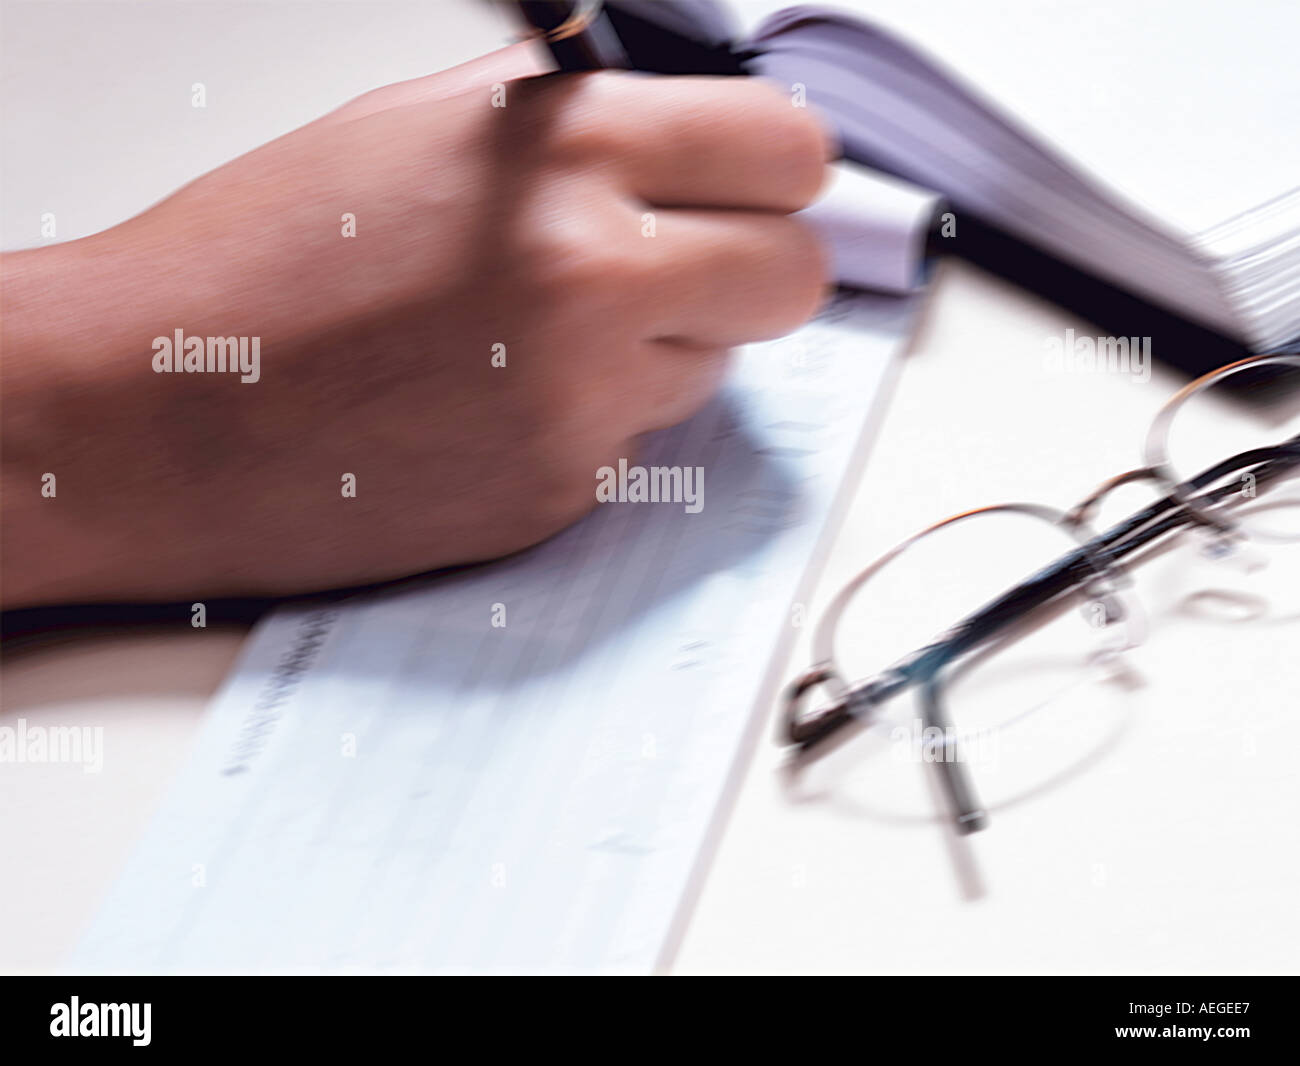 Office check checkbook filling out making writing payment order glasses spectacles appointment calendar hand pen blurred miscell Stock Photo